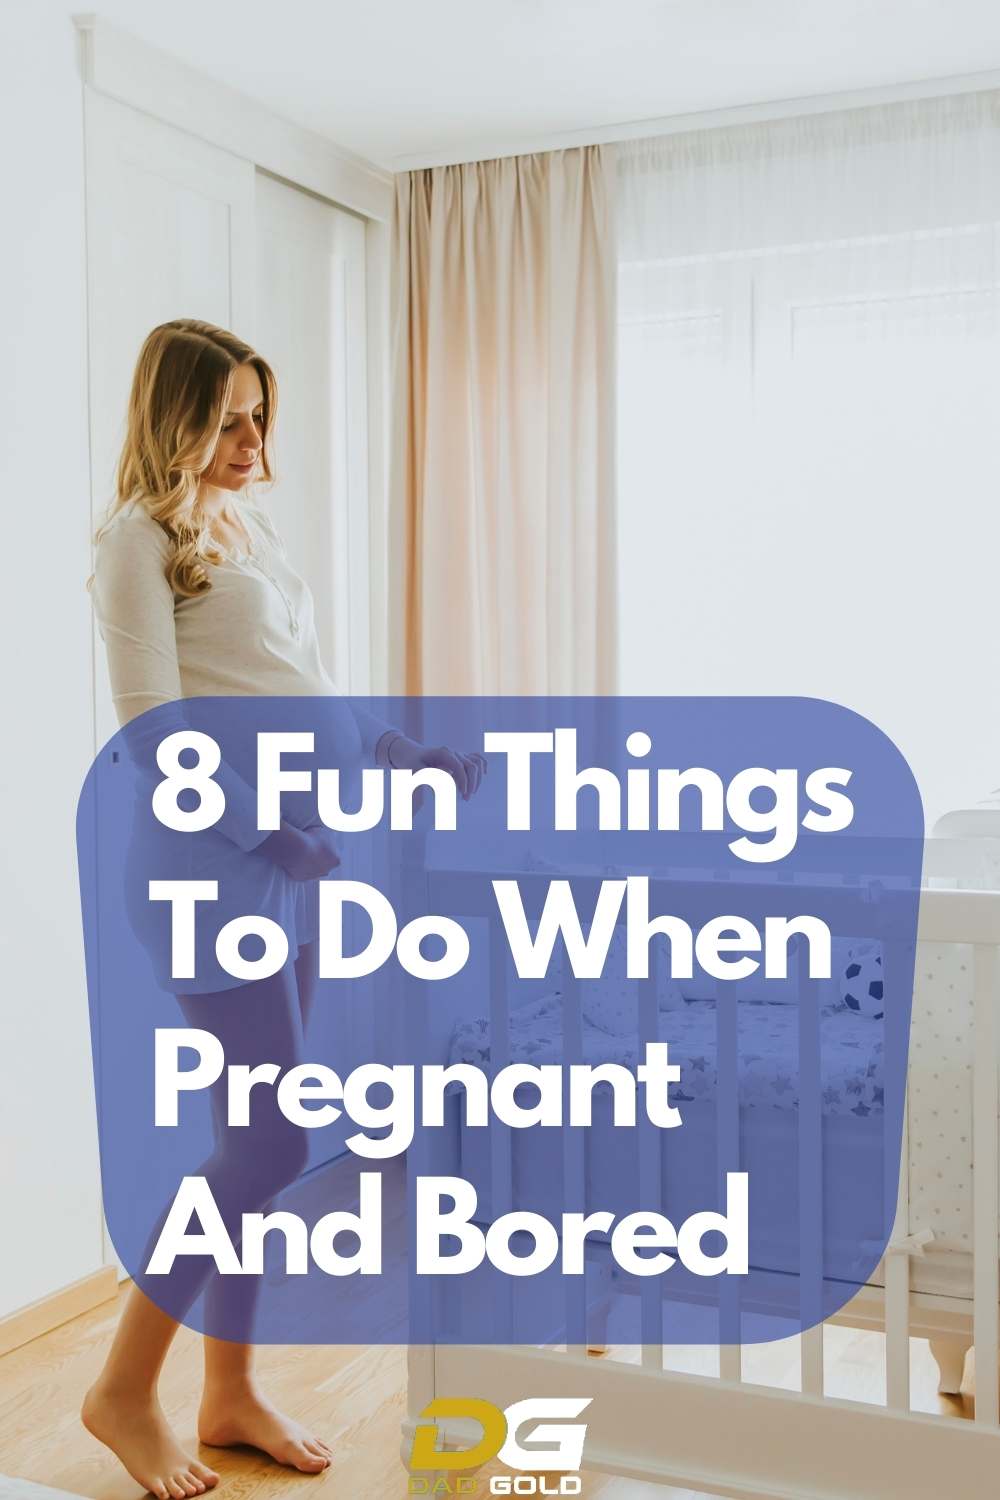 8 Fun Things To Do When Pregnant And Bored